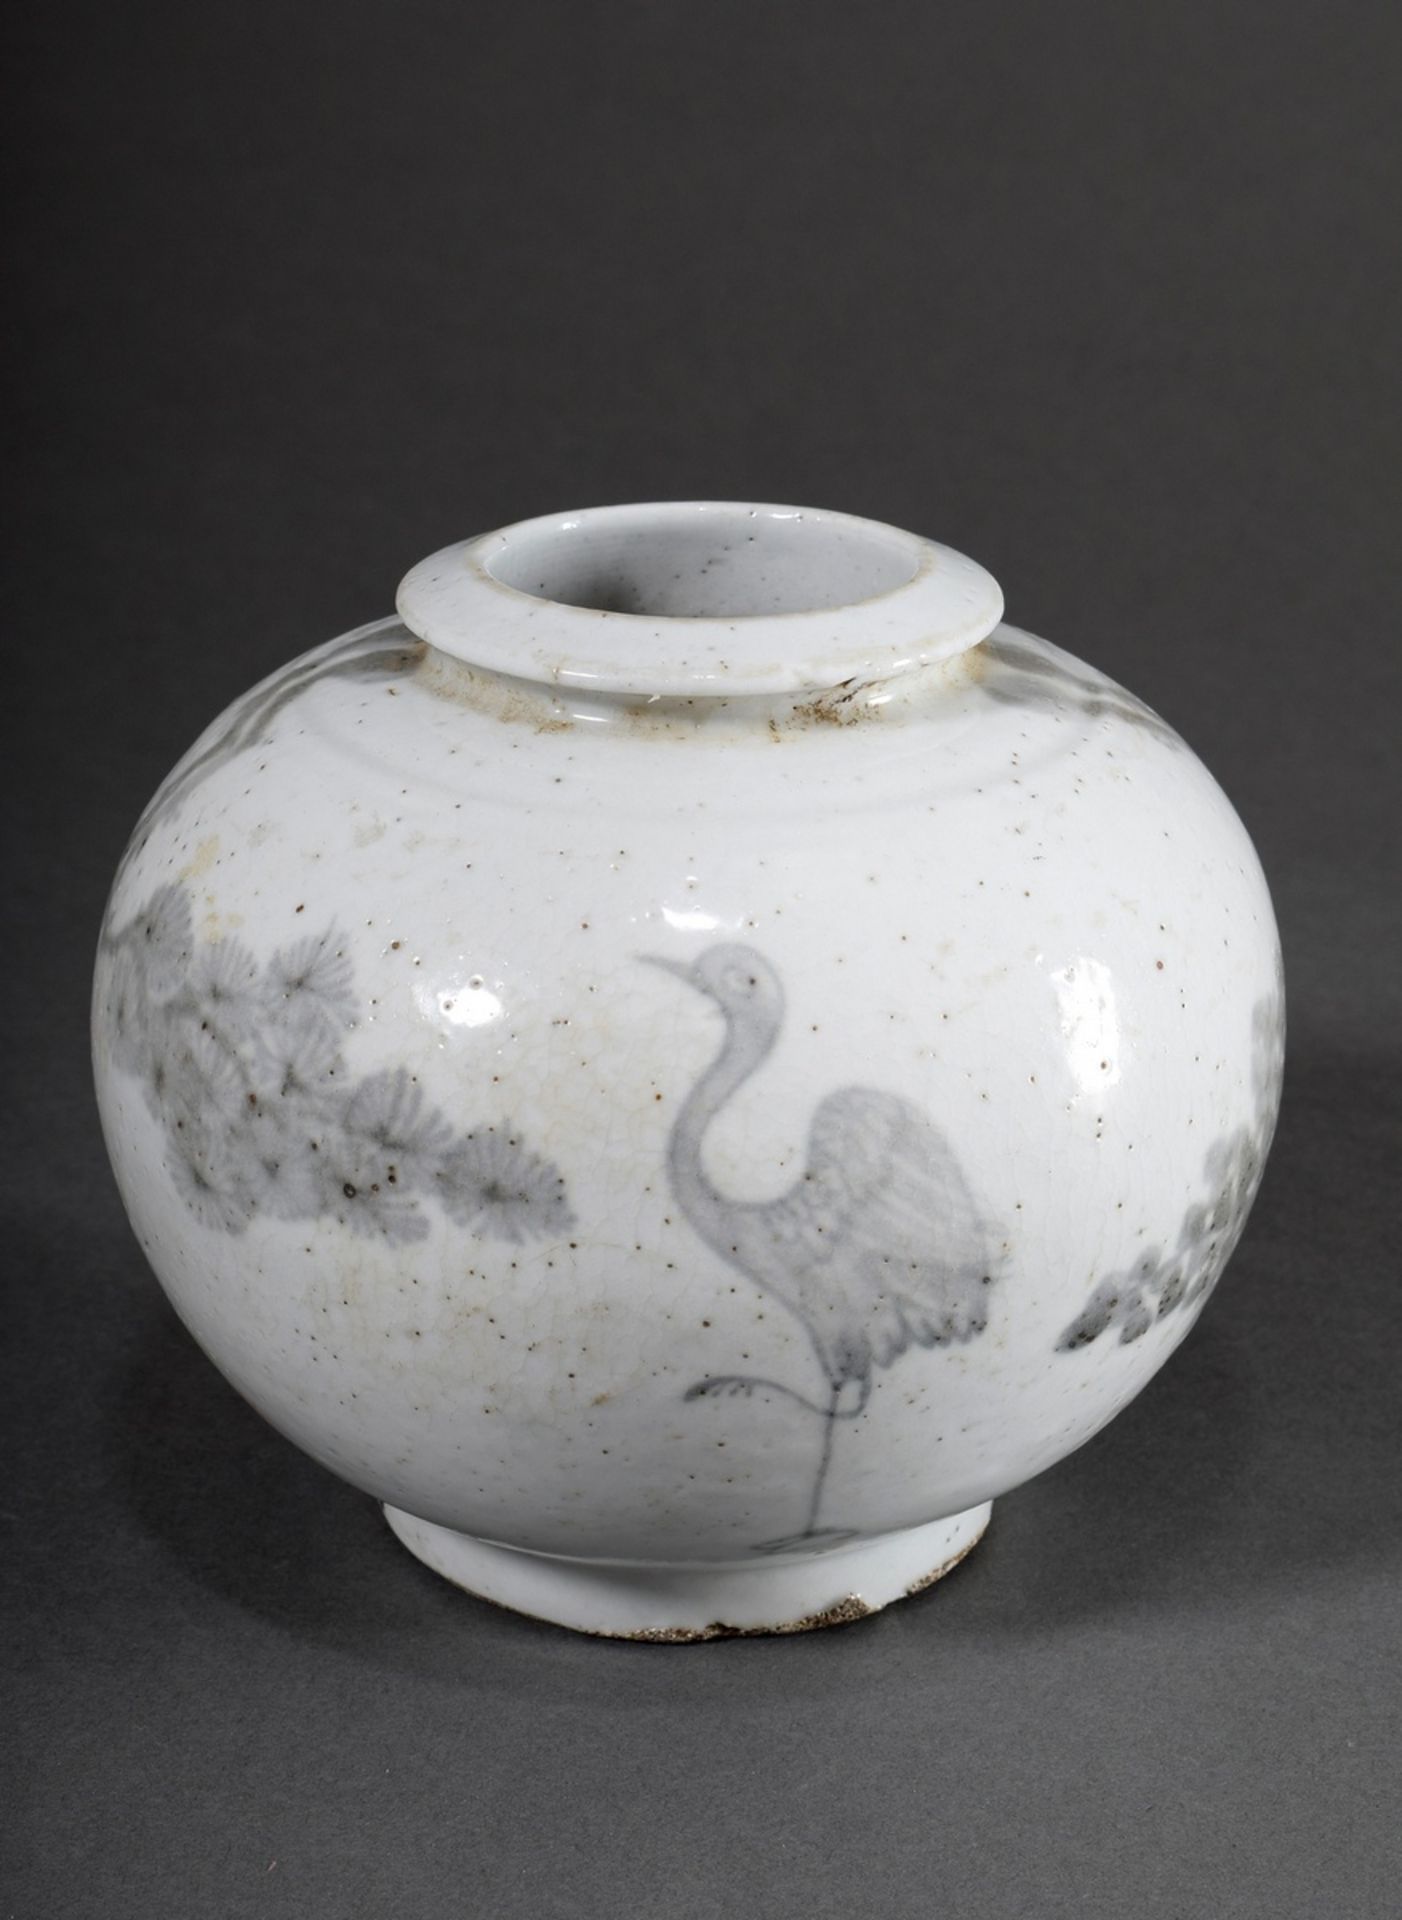 Small Moon vase with greyish painting on light glaze "Crane between branches", Korea 18th c., h. 13